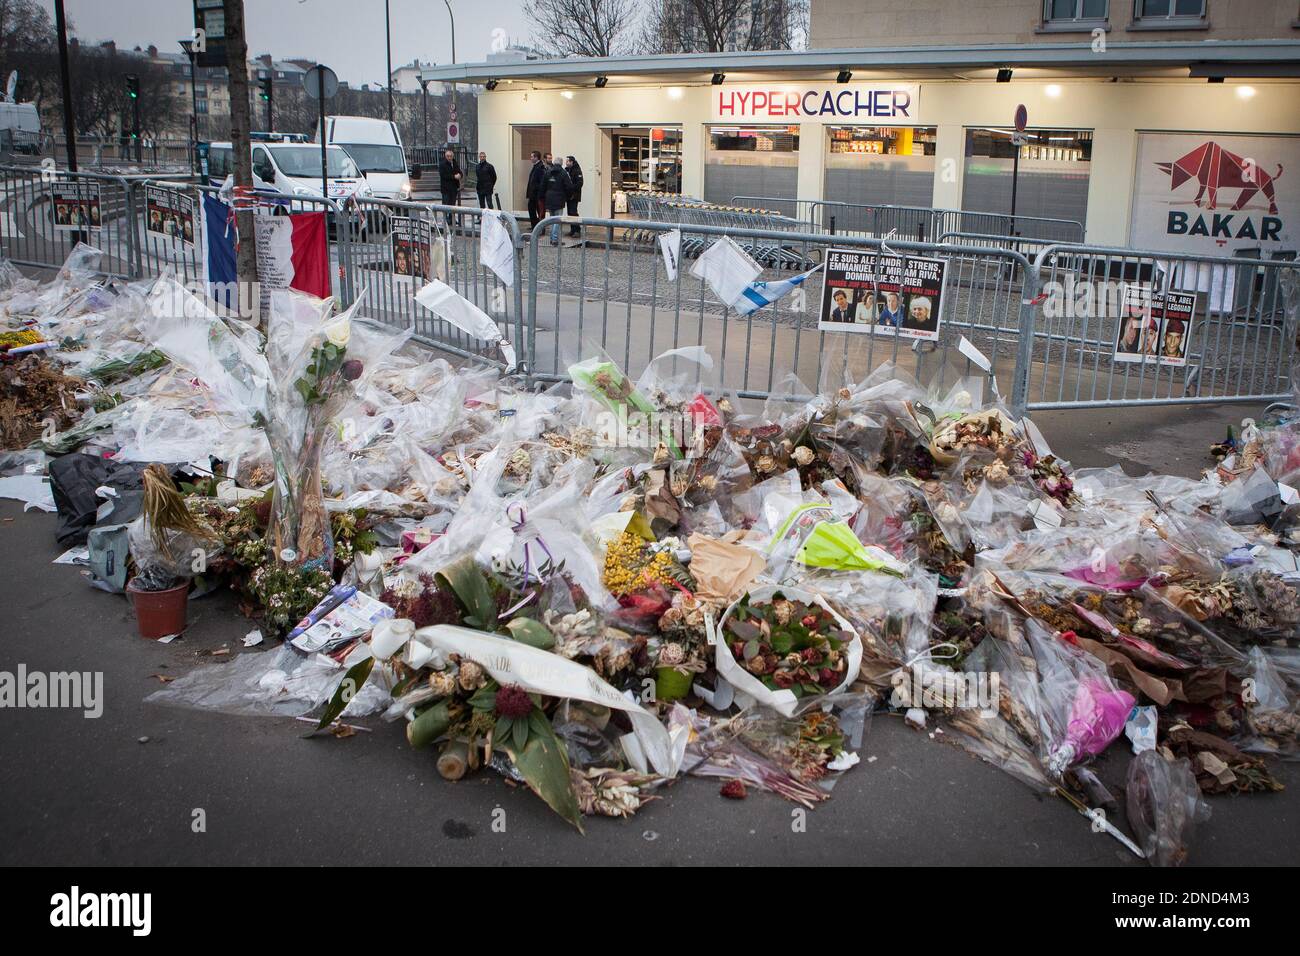 View of the opening of The supermarket Hyper Cacher 2 month after the  attack of terrorism wich 4 people was killed, held at Porte de Vincennes in  Paris, France, on March 15,